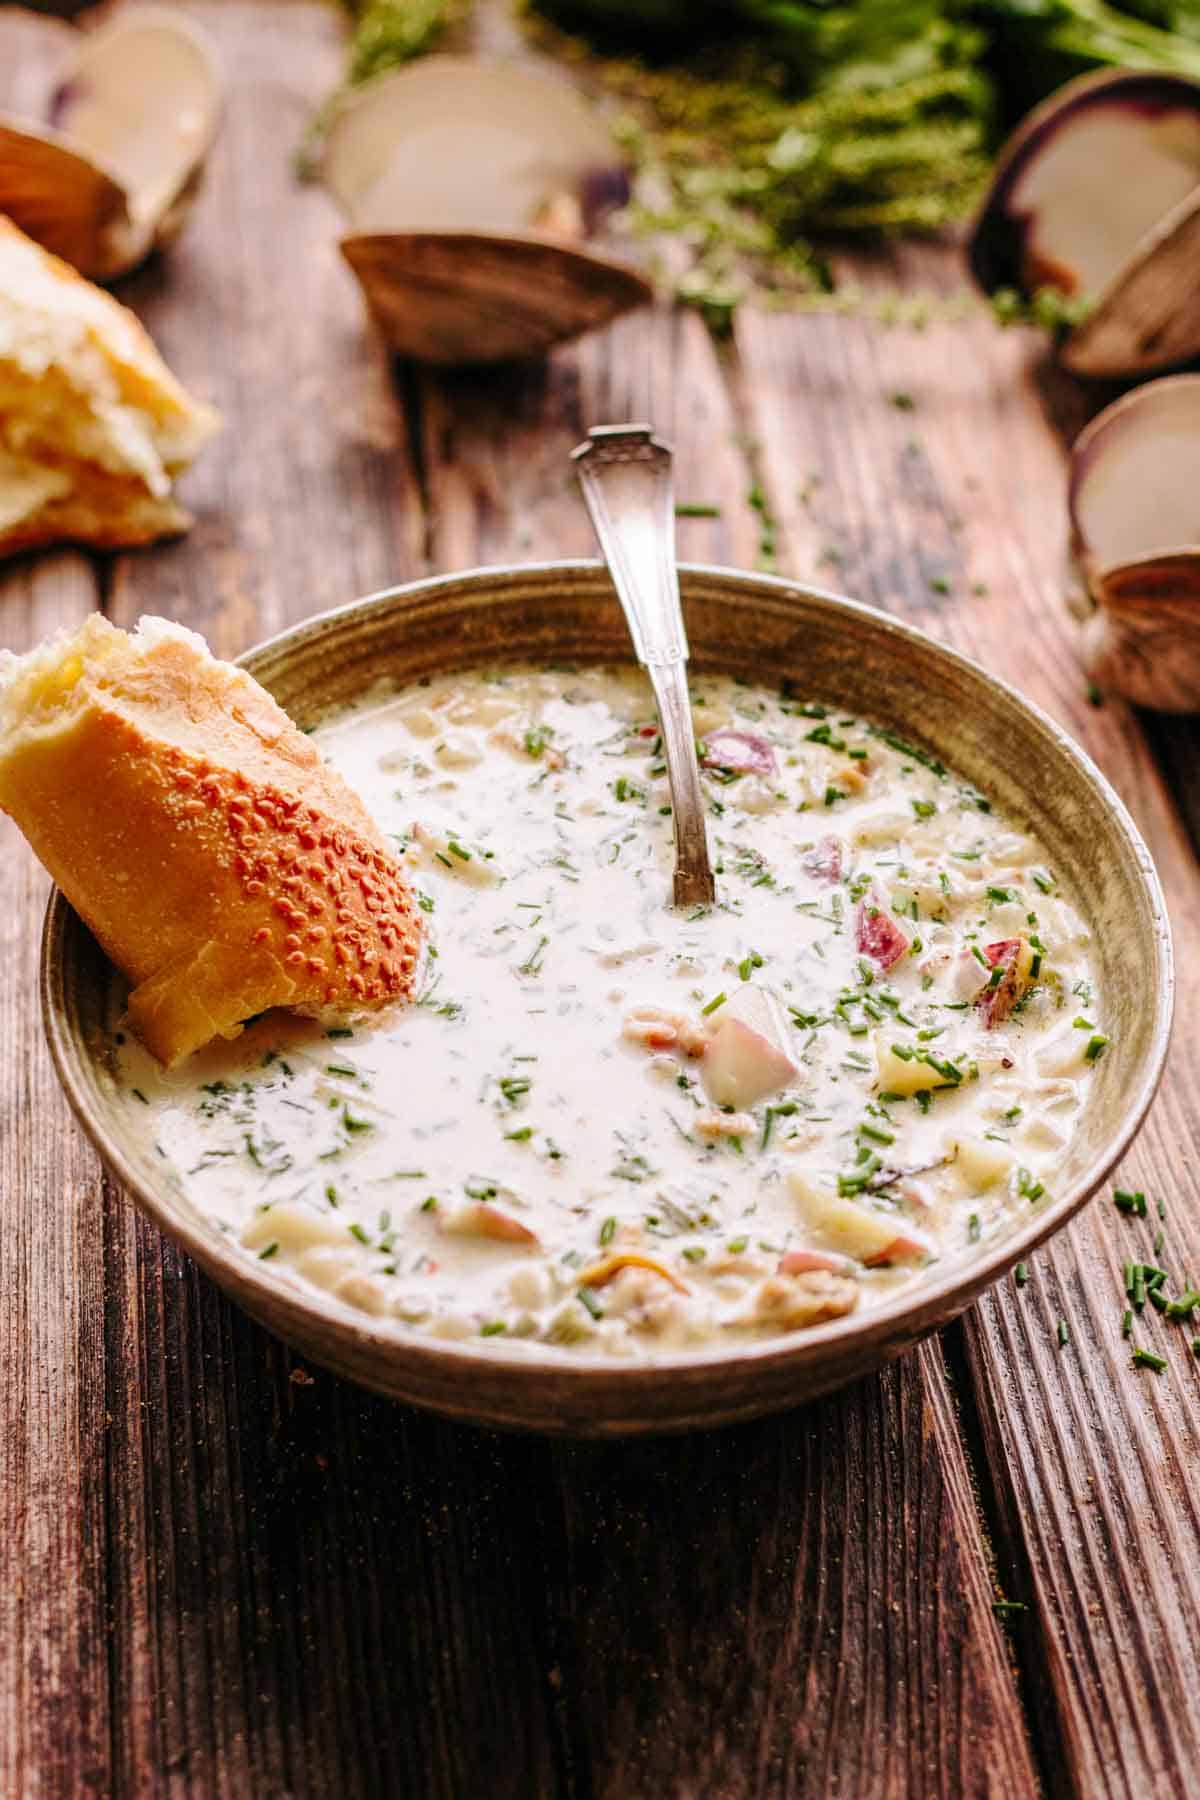 New England Creamy Clam Chowder – The Comfort of Cooking